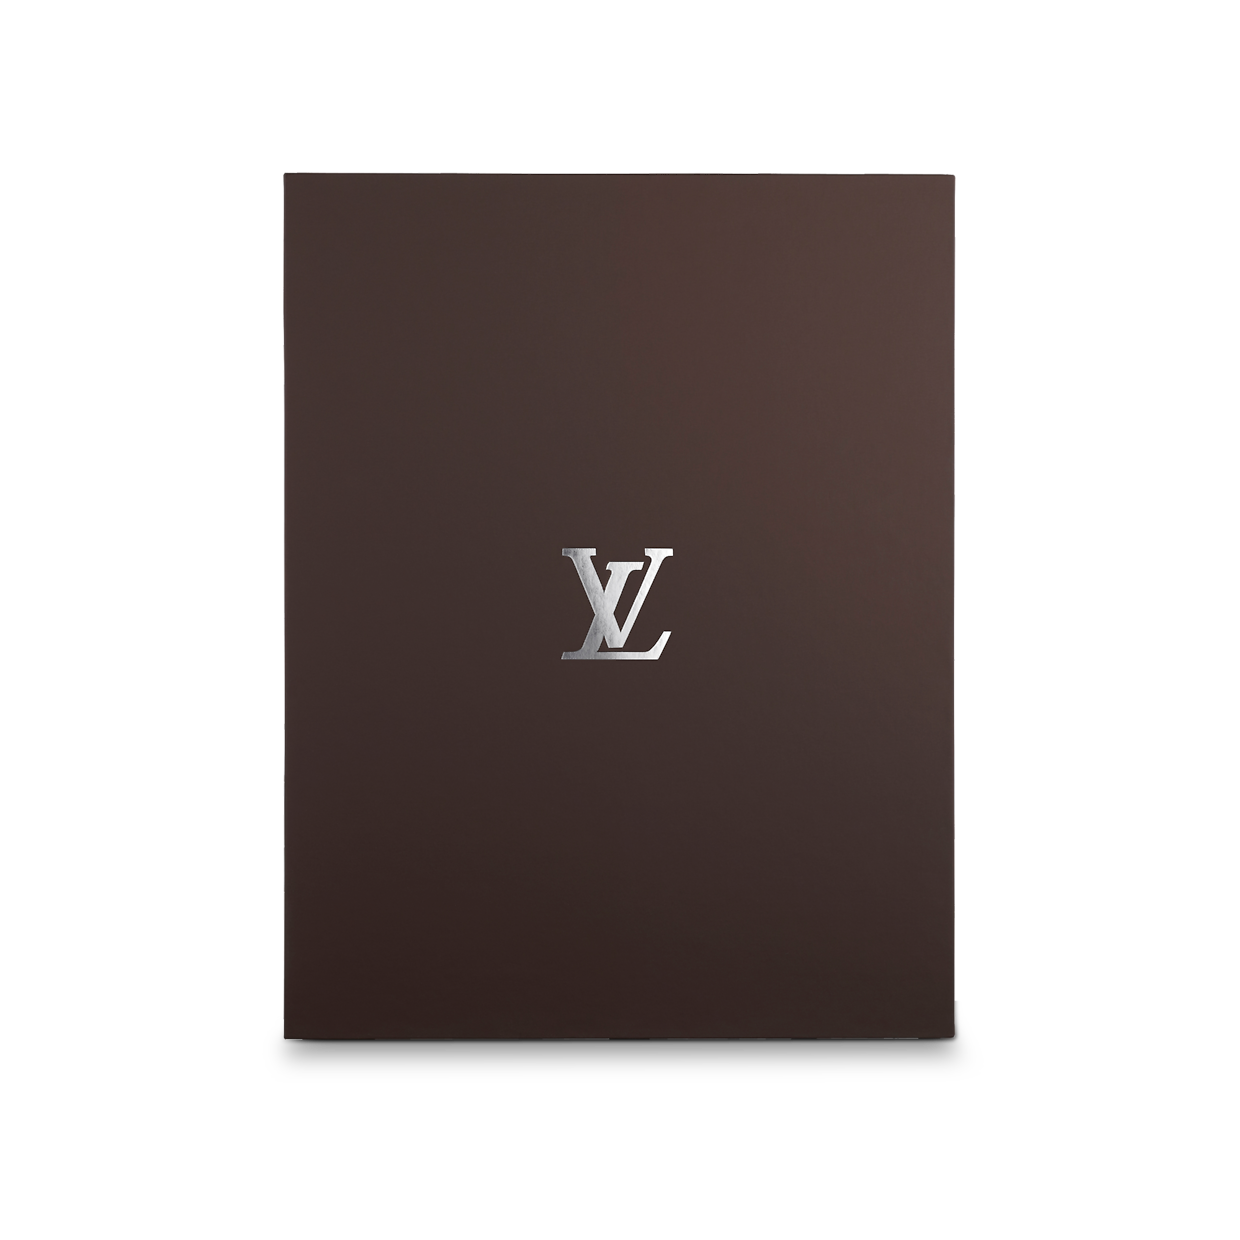 louis vuitton the birth of modern luxury updated edition hardcover